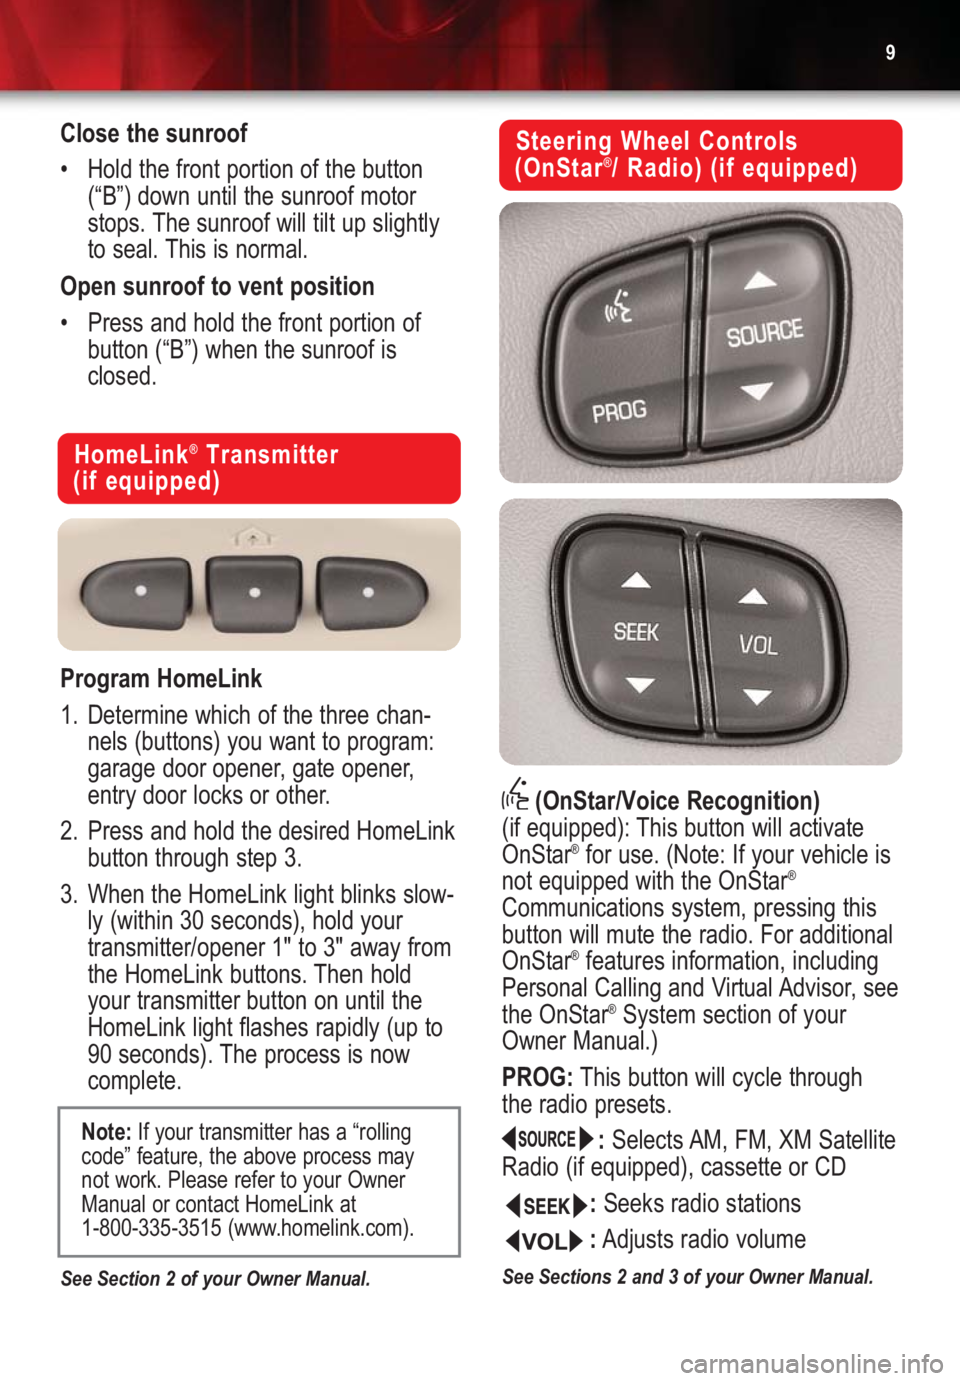 GMC YUKON 2004  Get To Know Guide 9
HomeLink®Transmitter 
(if equipped)
Program HomeLink
1. Determine which of the three chan-
nels (buttons) you want to program:
garage door opener, gate opener,
entry door locks or other.
2. Press a